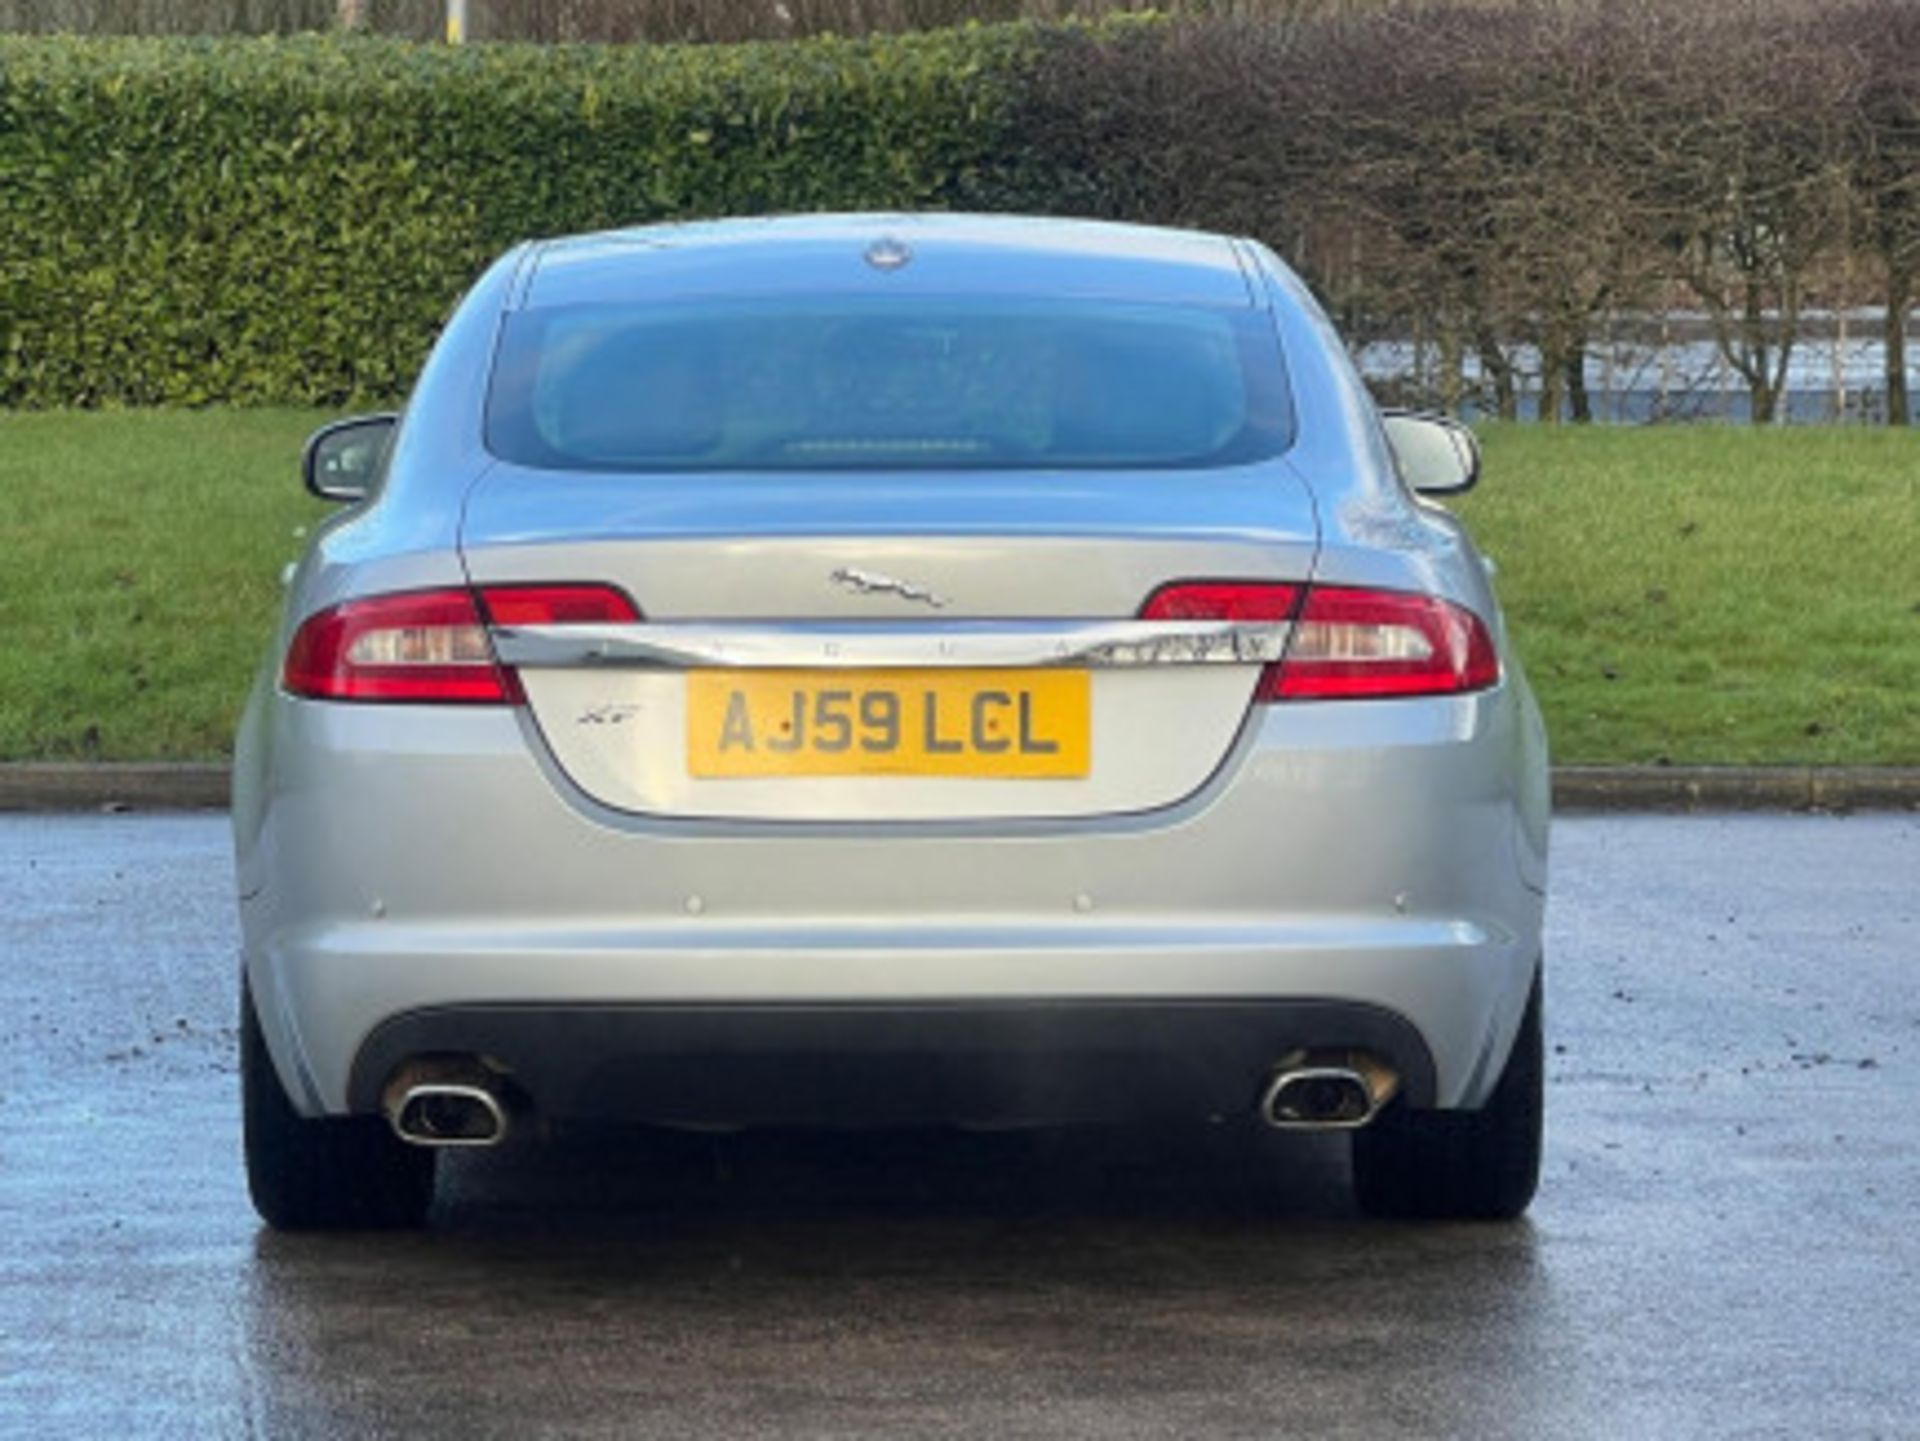 LUXURIOUS JAGUAR XF 3.0D V6 LUXURY 4DR AUTOMATIC SALOON >>--NO VAT ON HAMMER--<< - Image 38 of 80